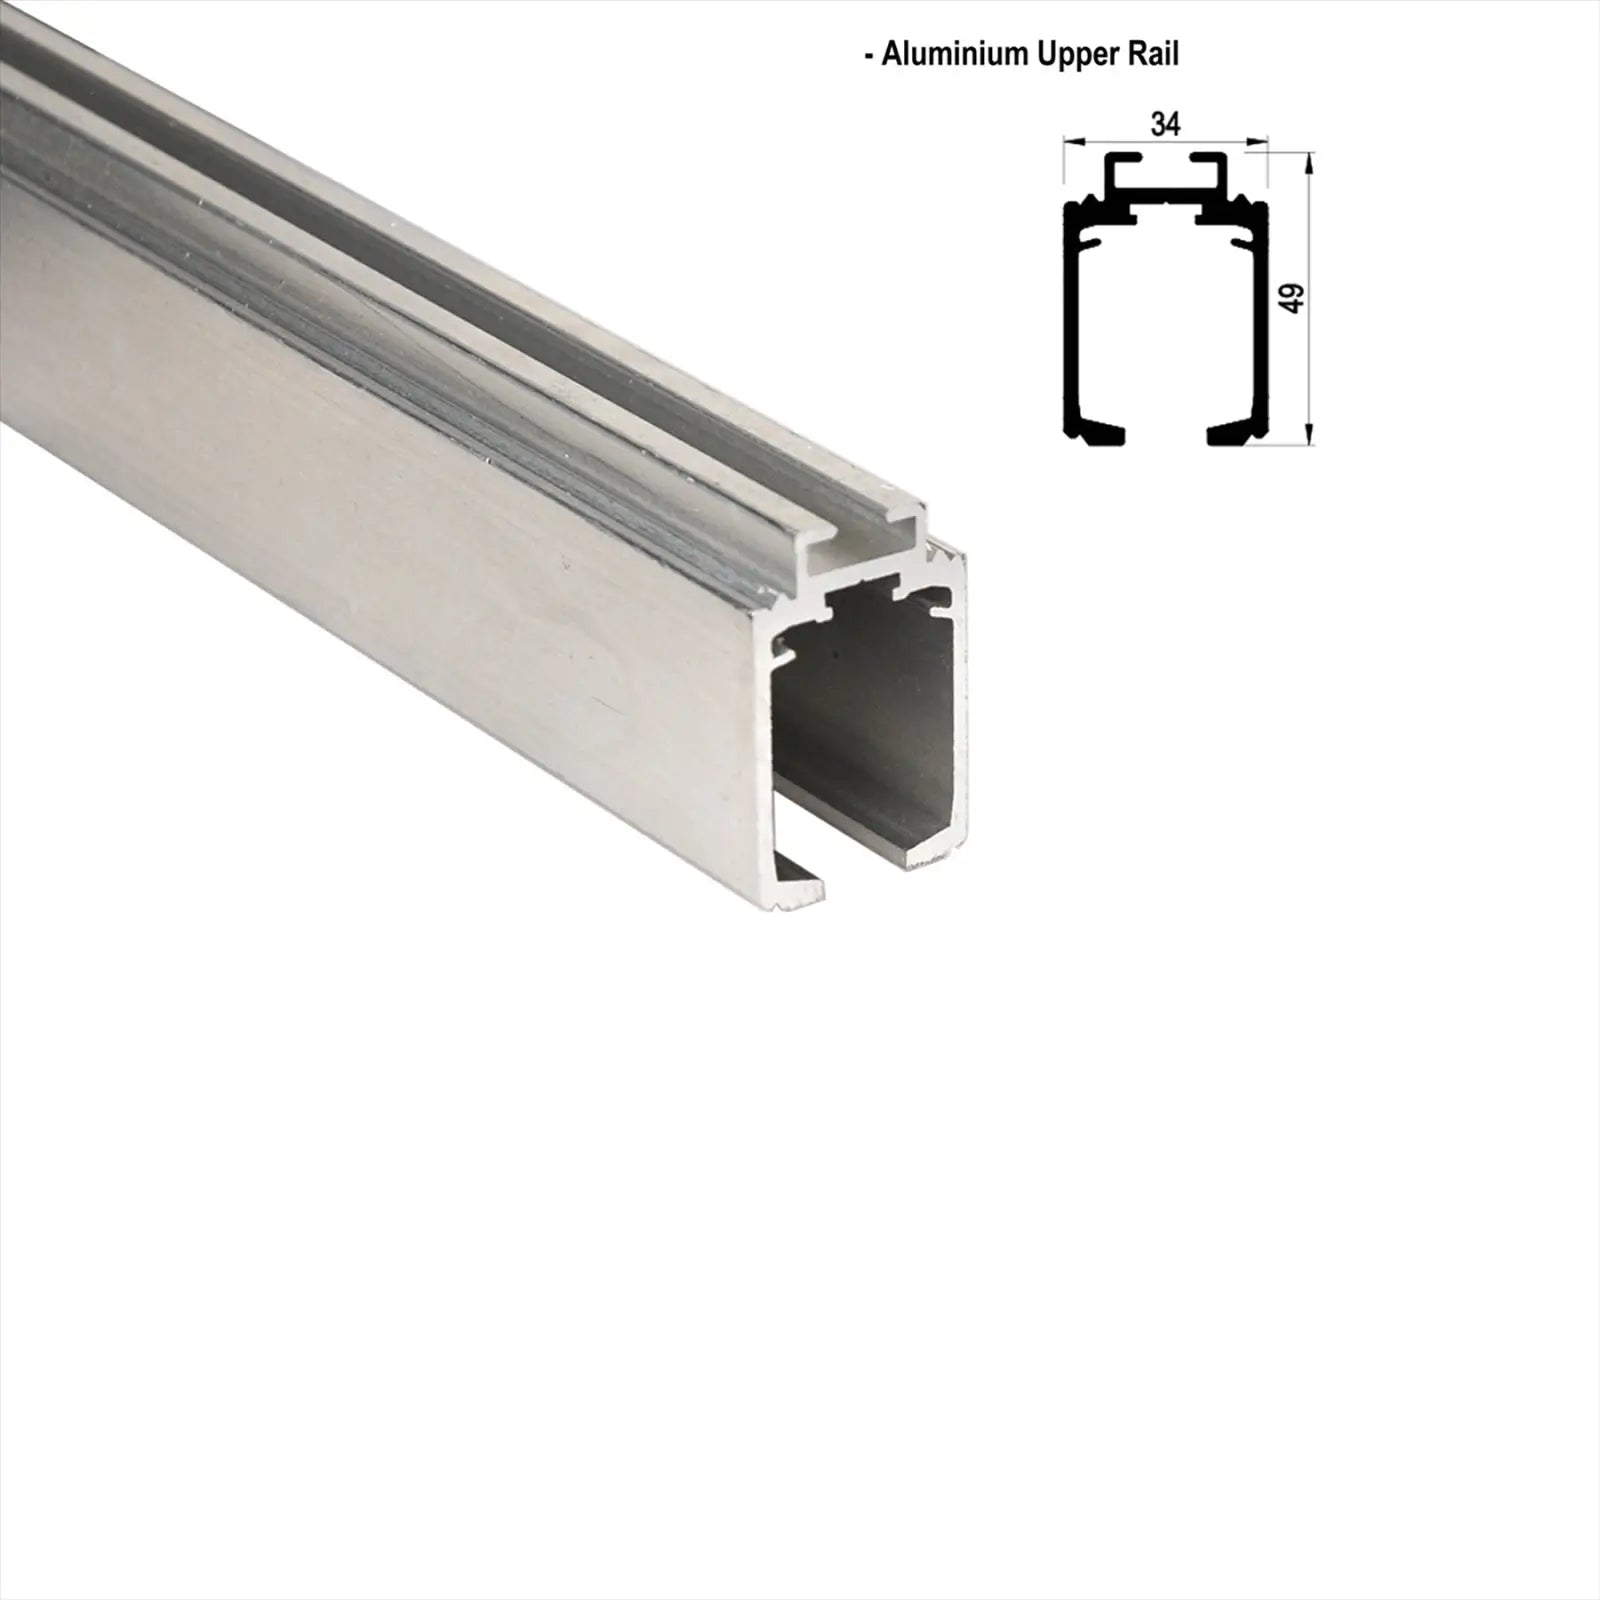 DS-Slide Double Synchro Sliding Door Kit - 6000mm Track - One Way Soft Close - Decor And Decor